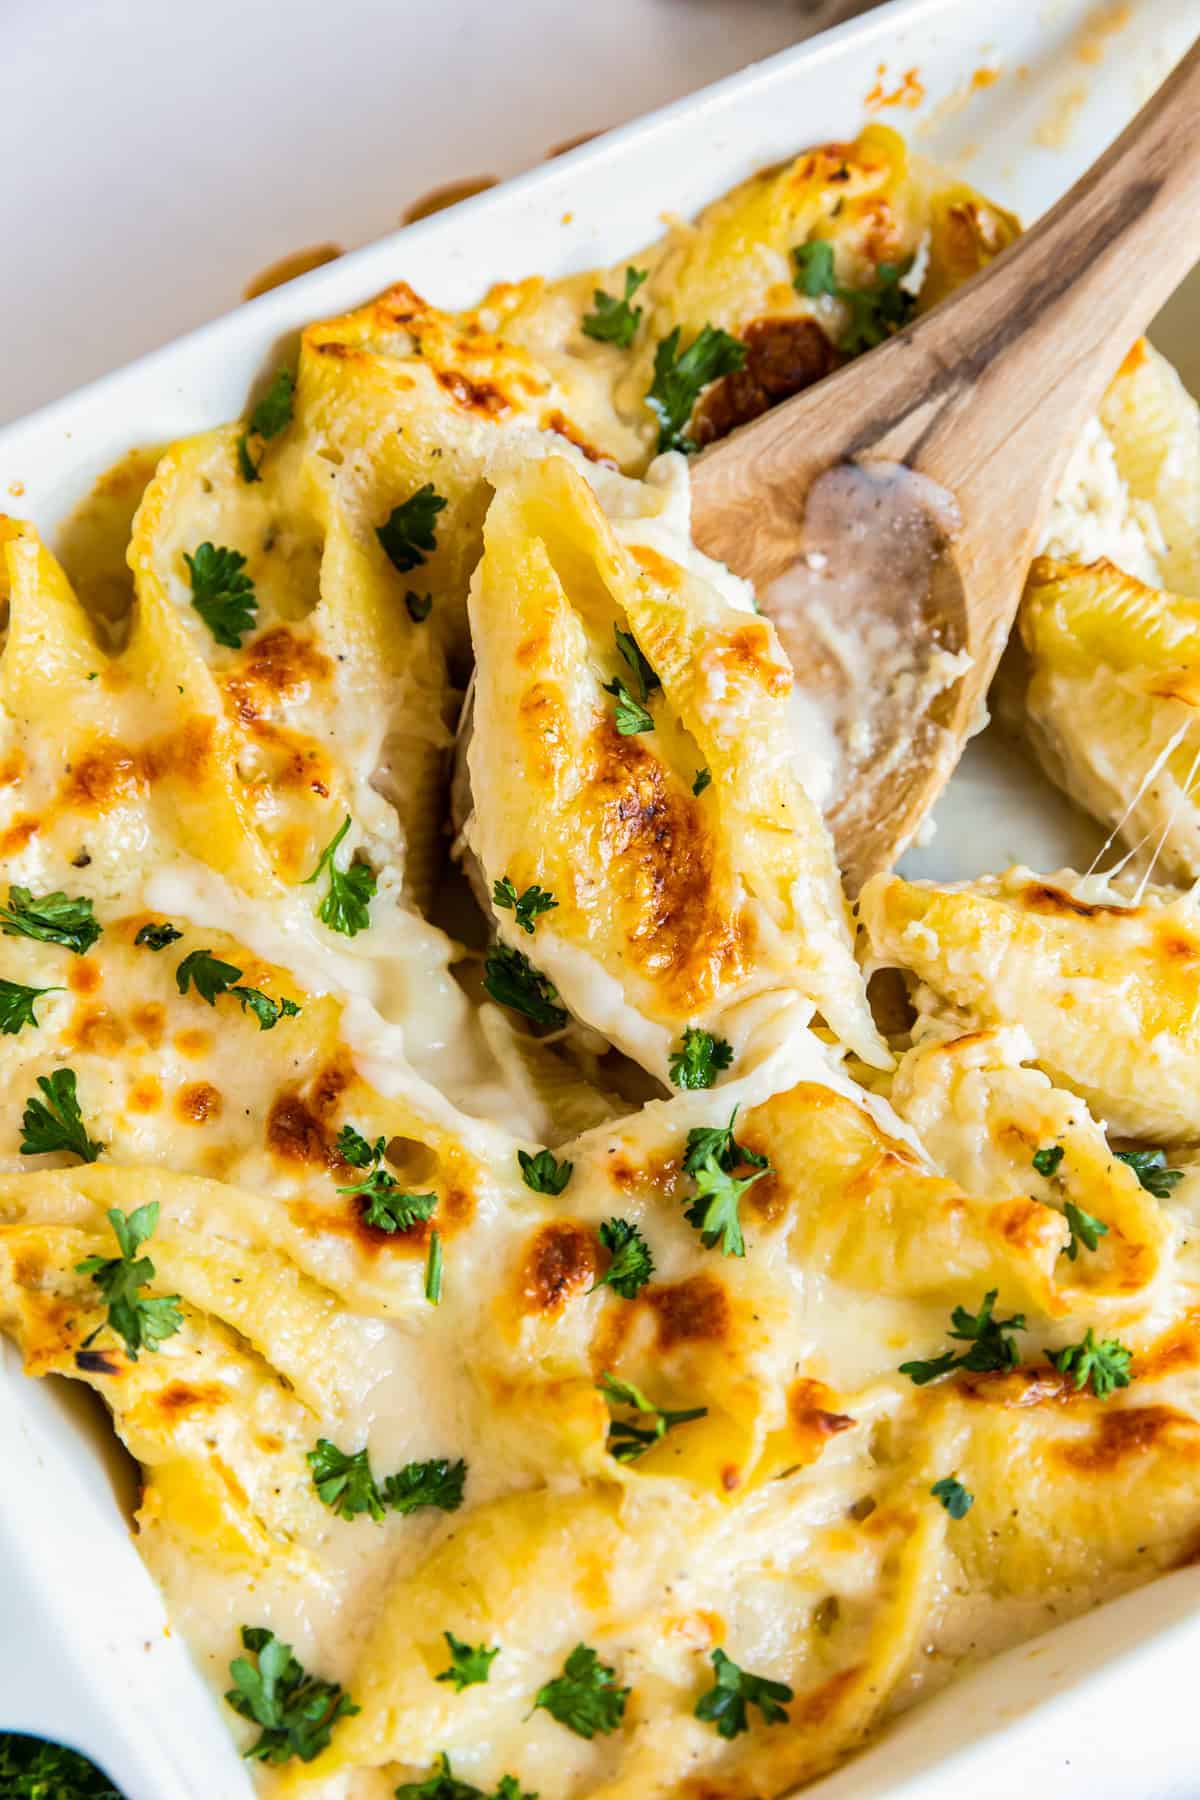 cheesy stuffed shells in a white dish with a wooden spoon.